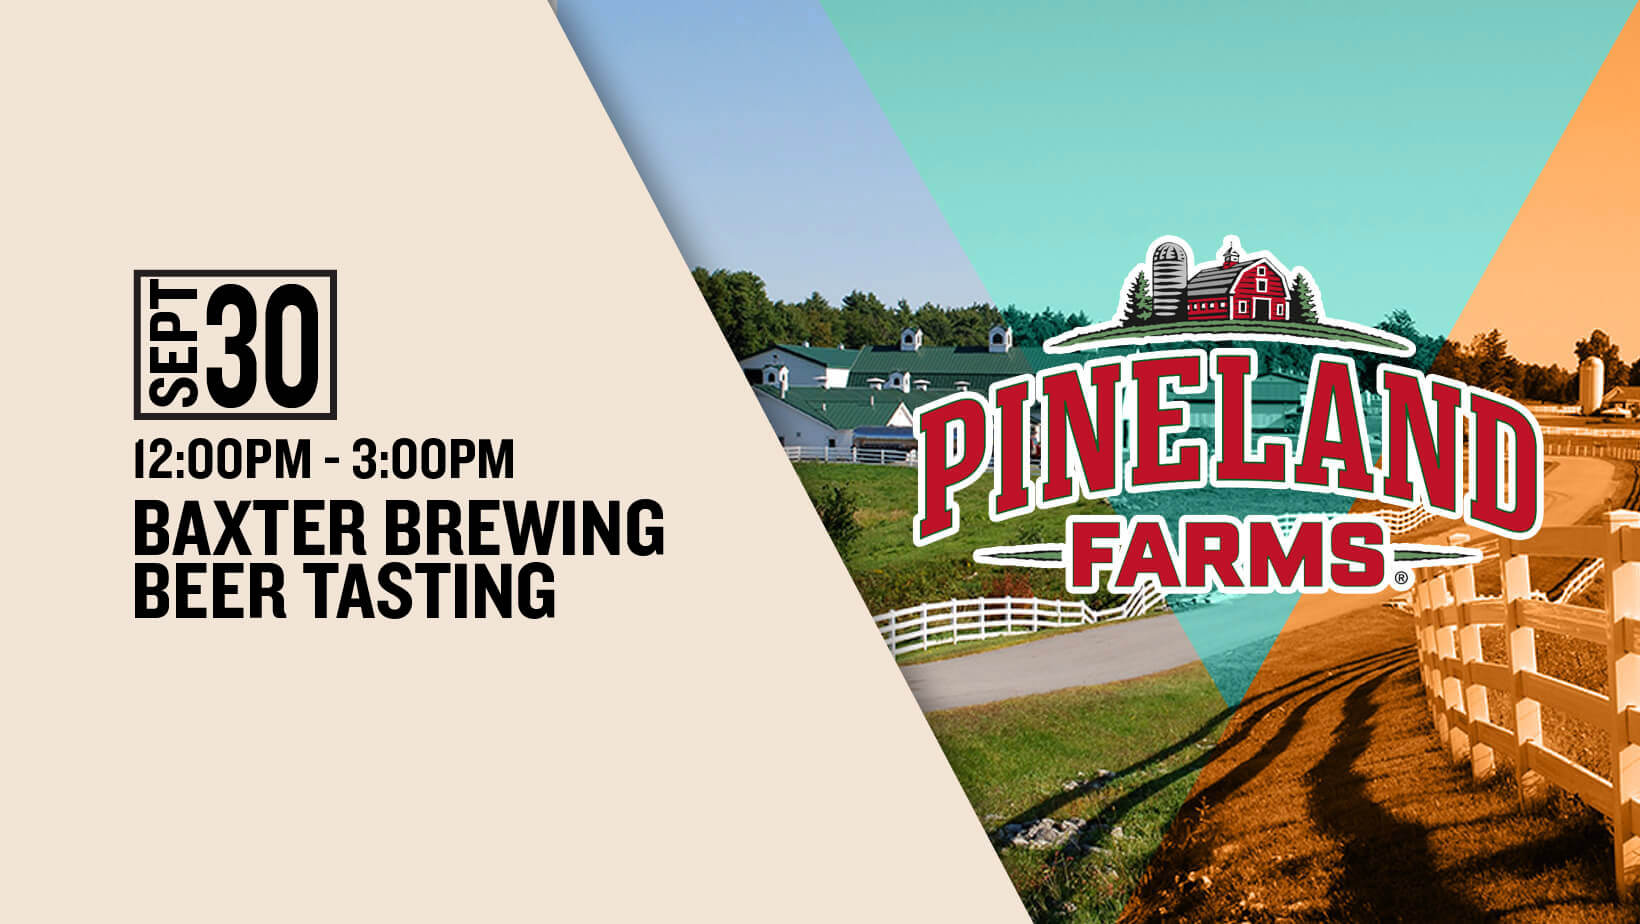 Image promoting event September 30th for a beer tasting at Pineland Farms